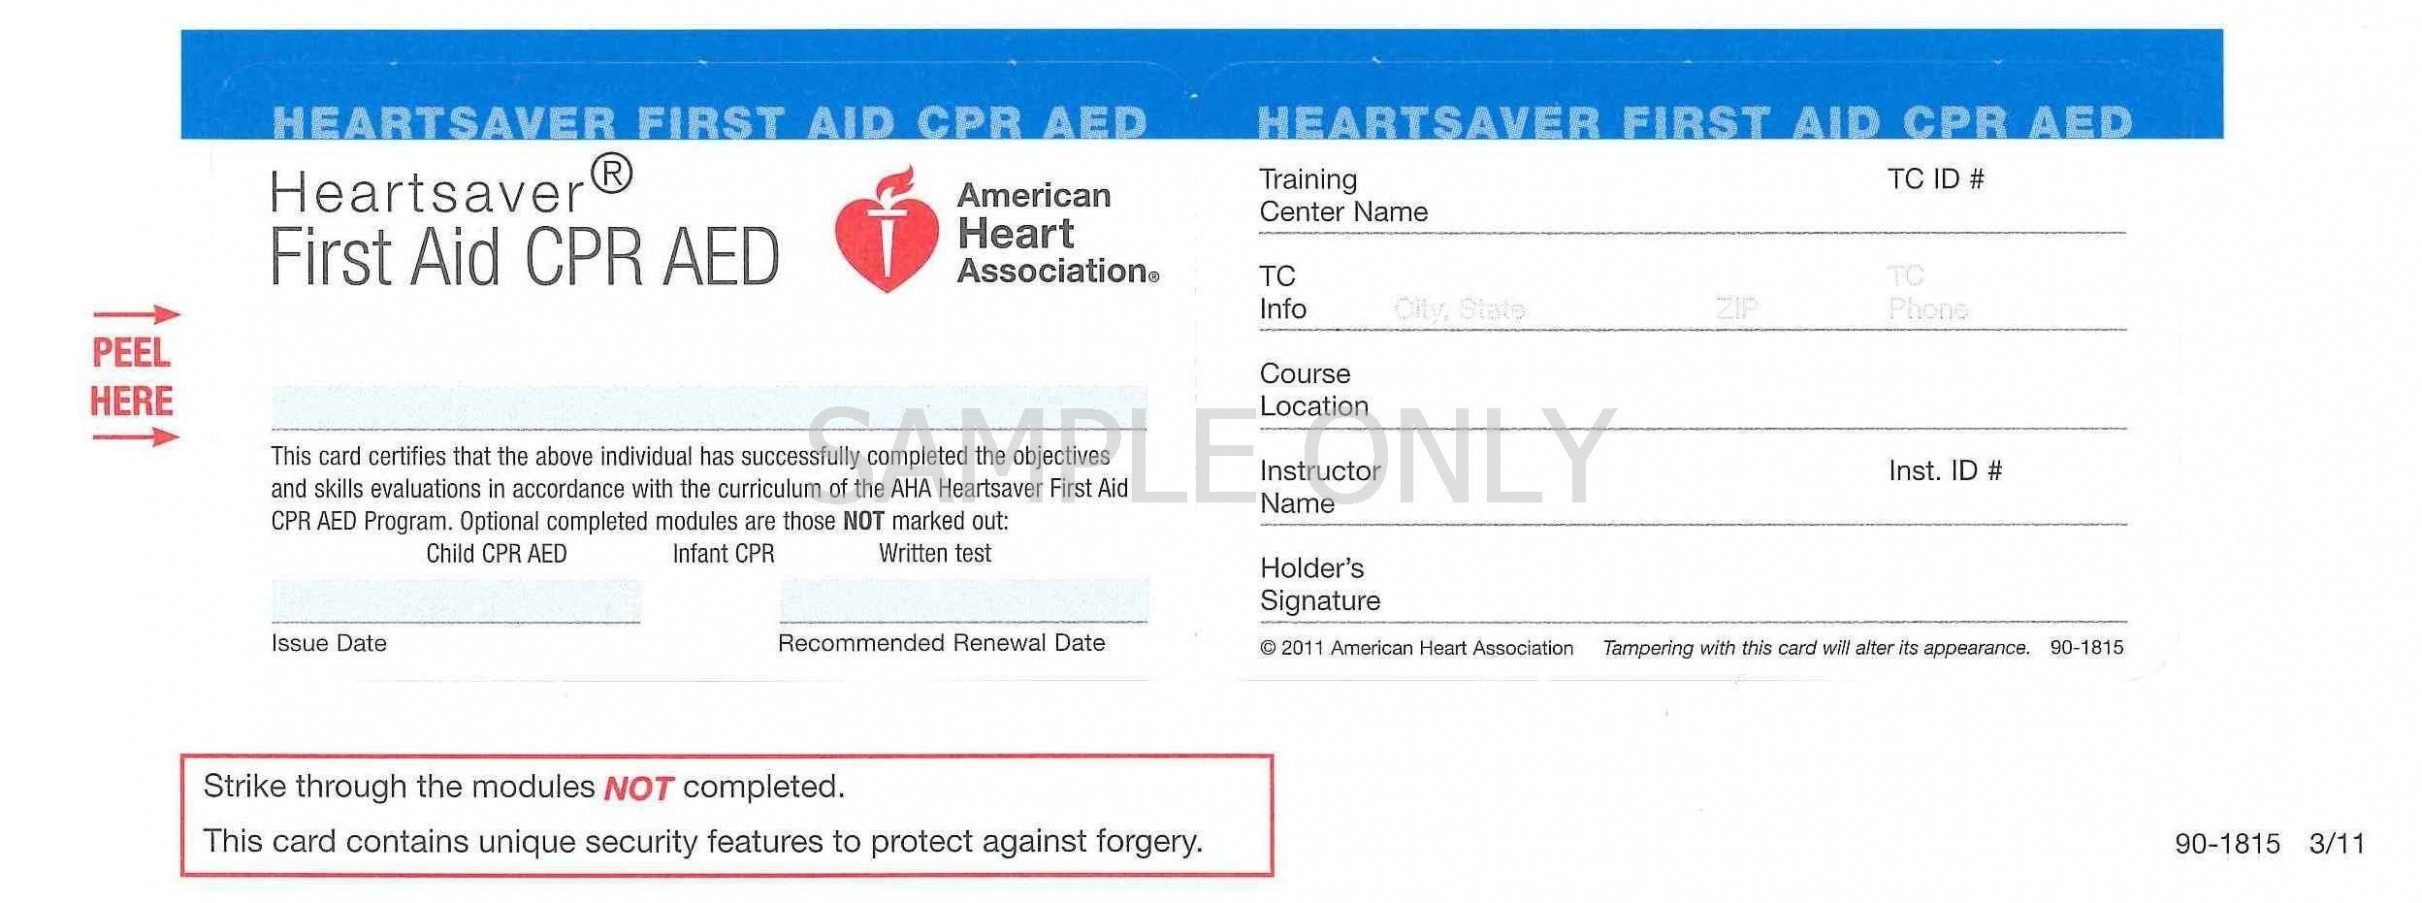 Blank Cpr Card Template | Invitation Card Intended For Cpr Card Template